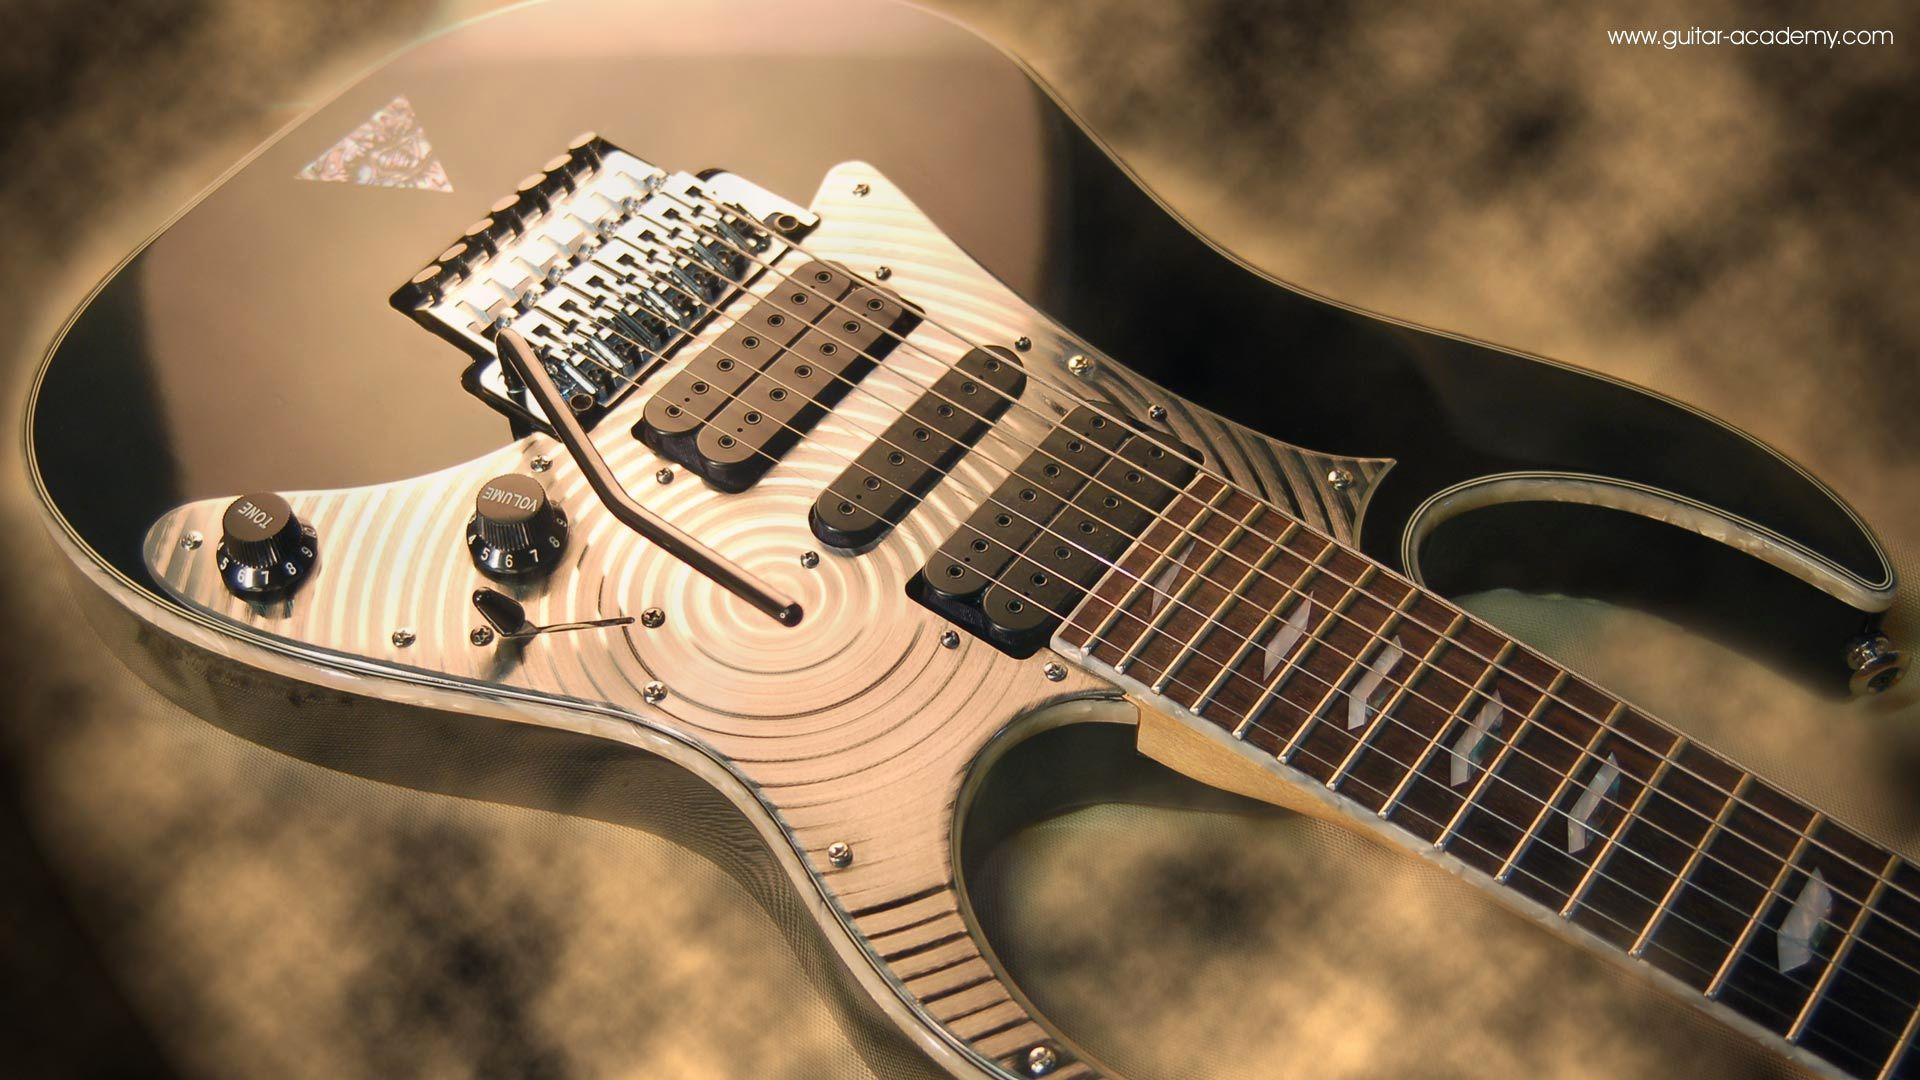 Ibanez Telecaster Free HD Picture Wallpaper Download Beautiful 50